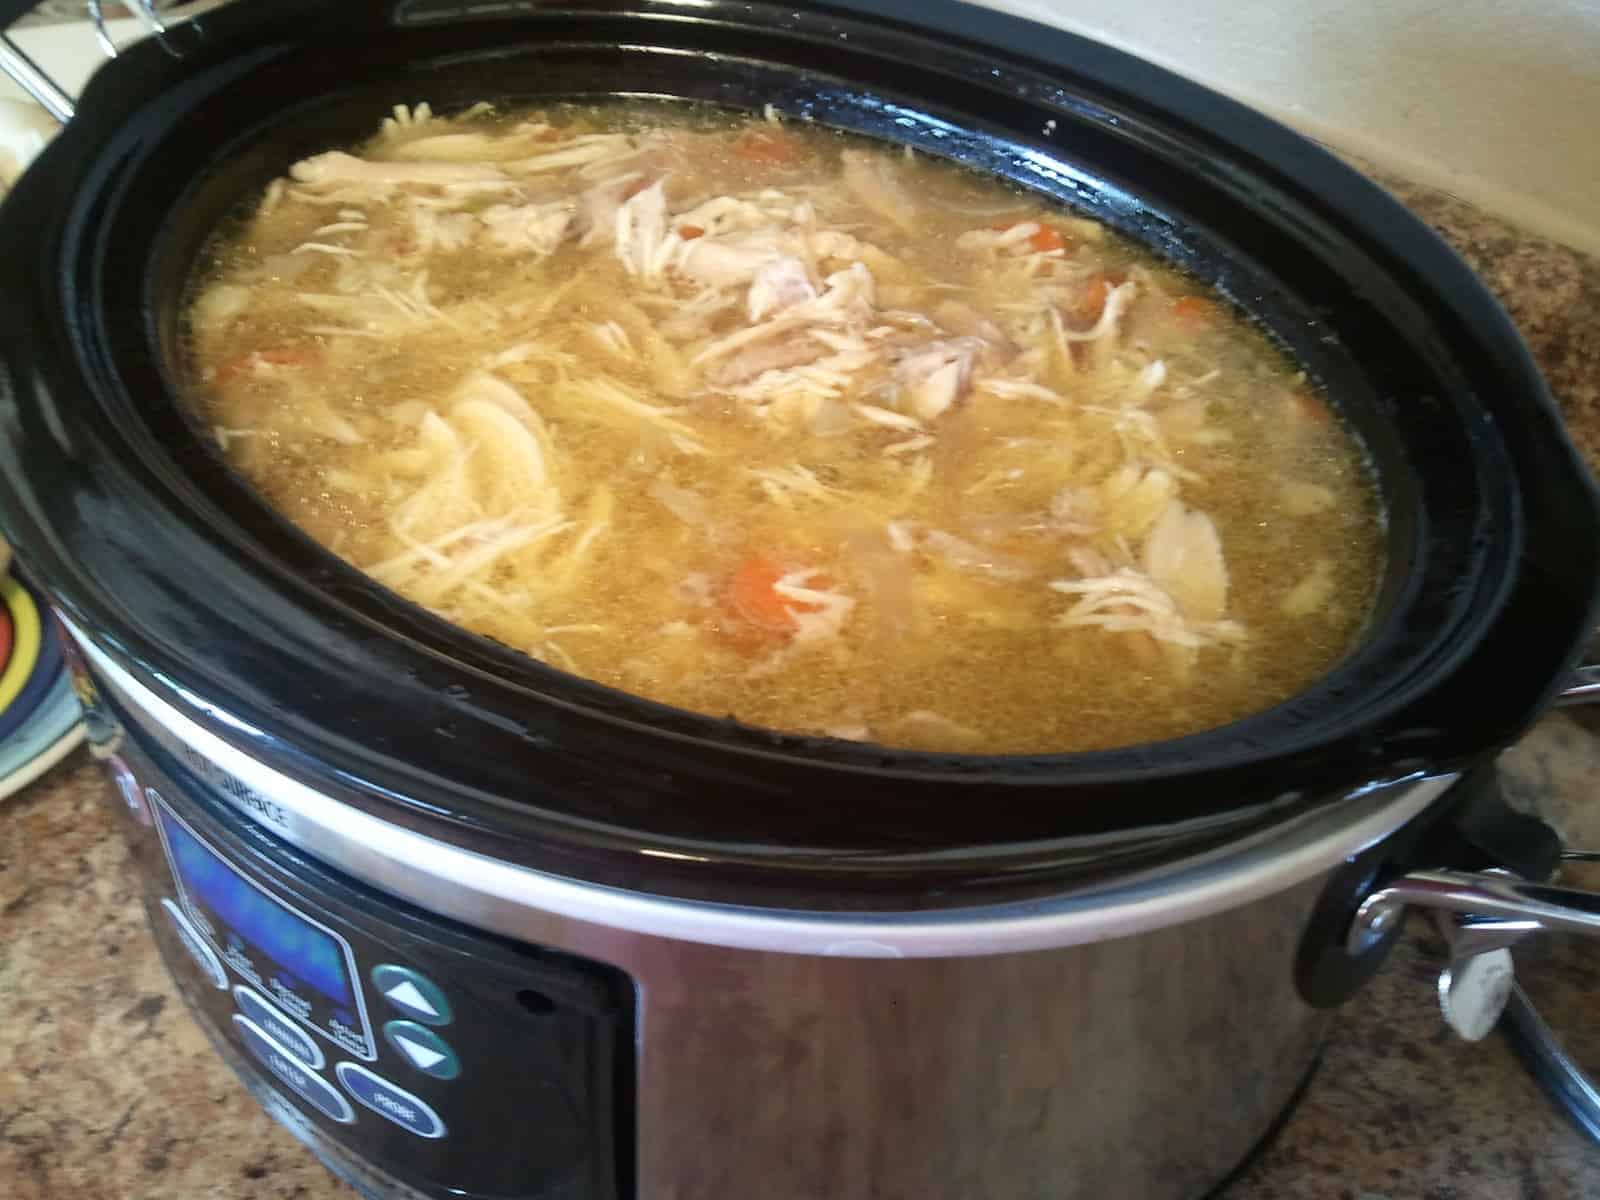 Homemade chicken soup in the crockpot